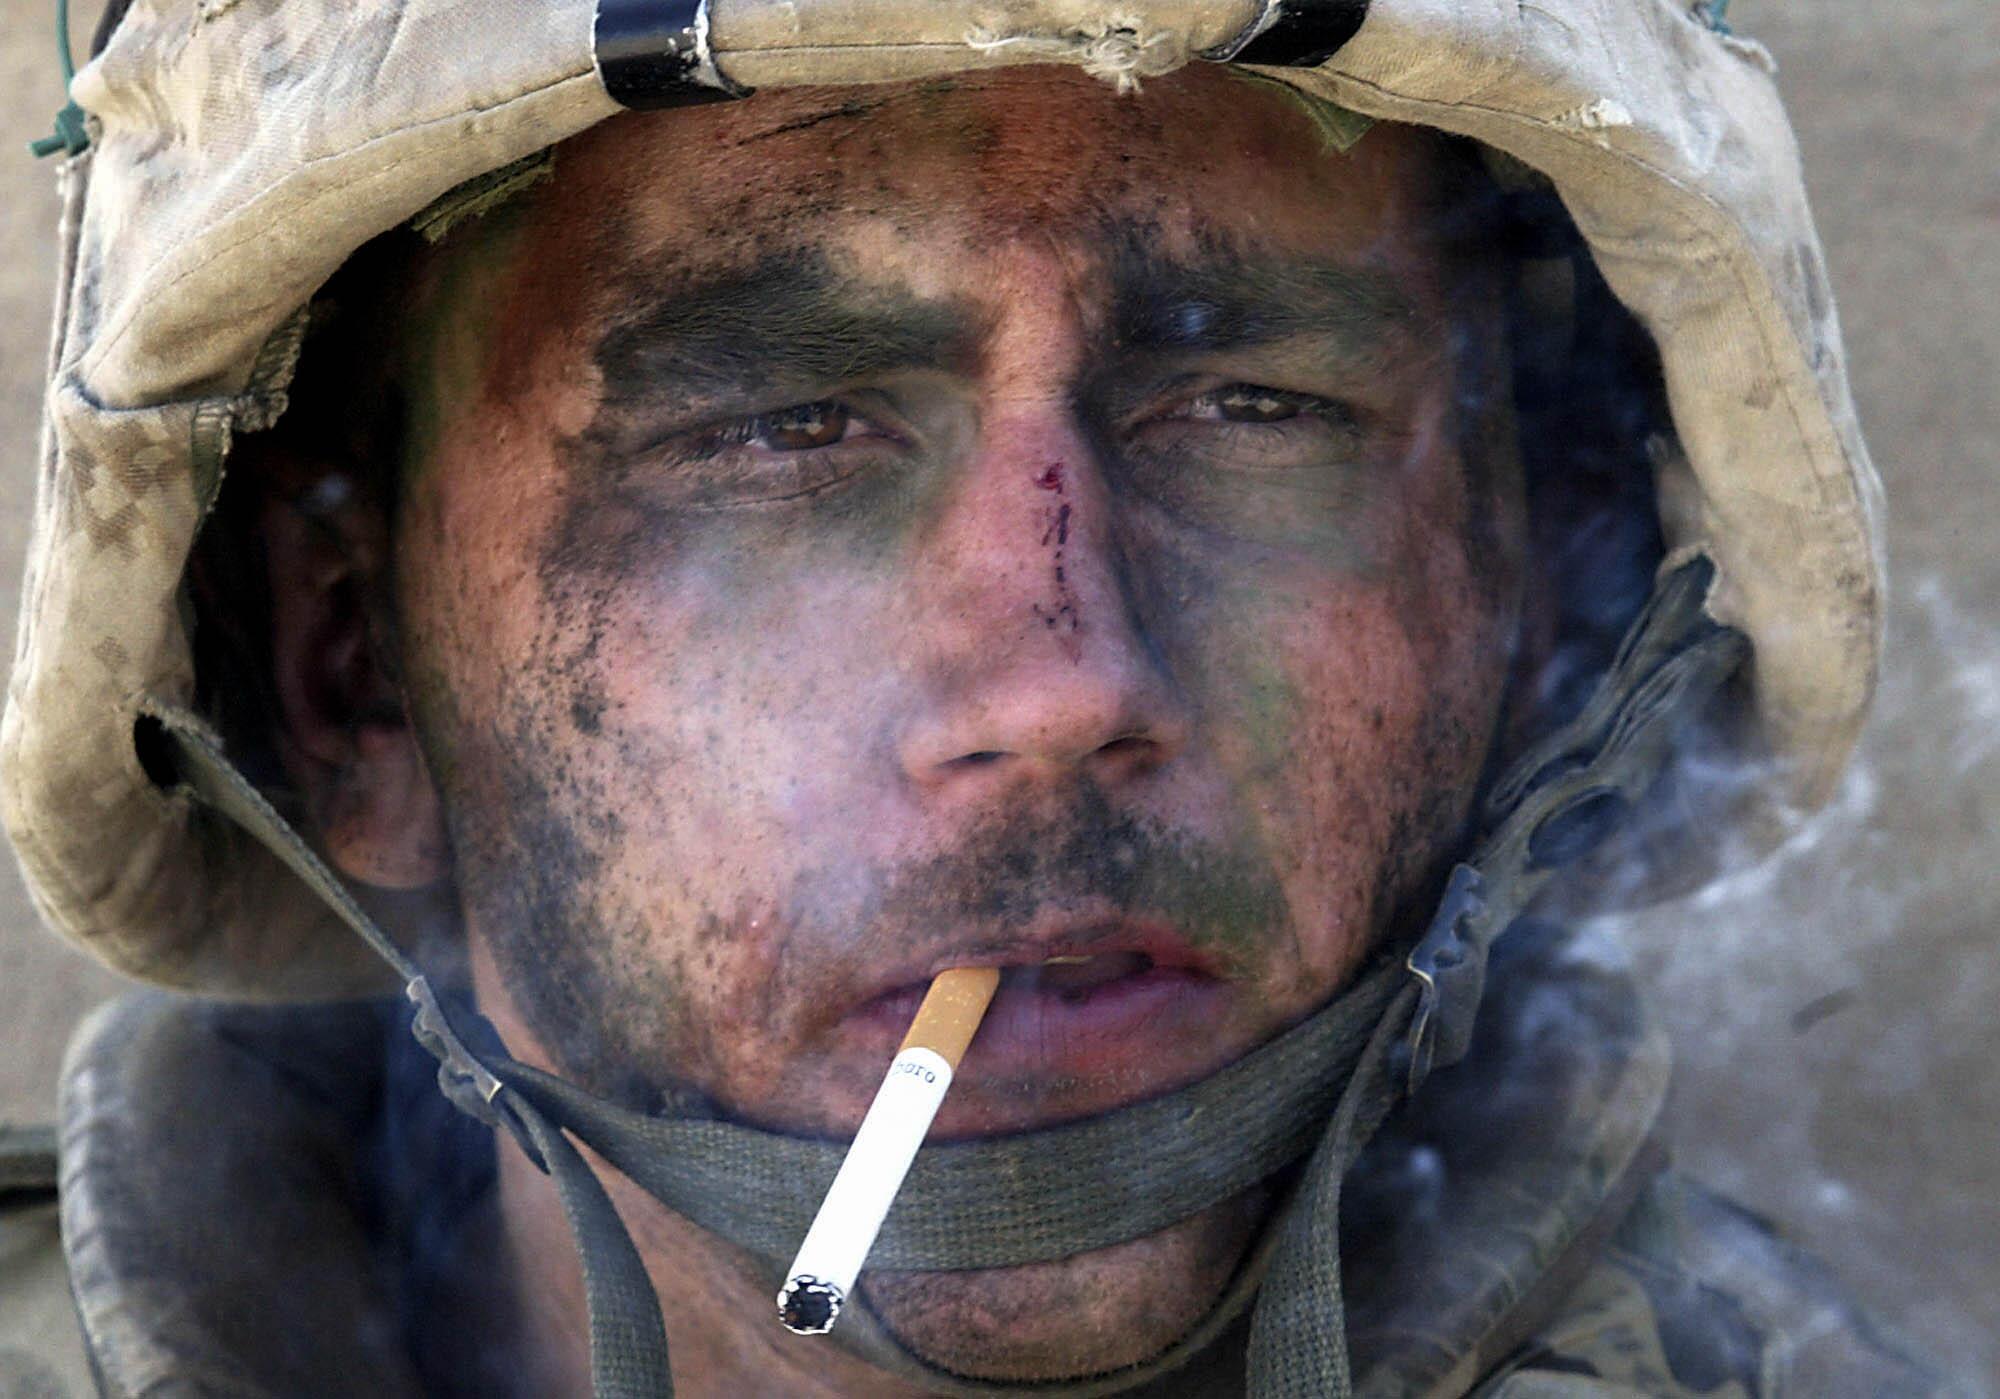 A closeup of a Marine smoking a cigarette, his face covered in dirt